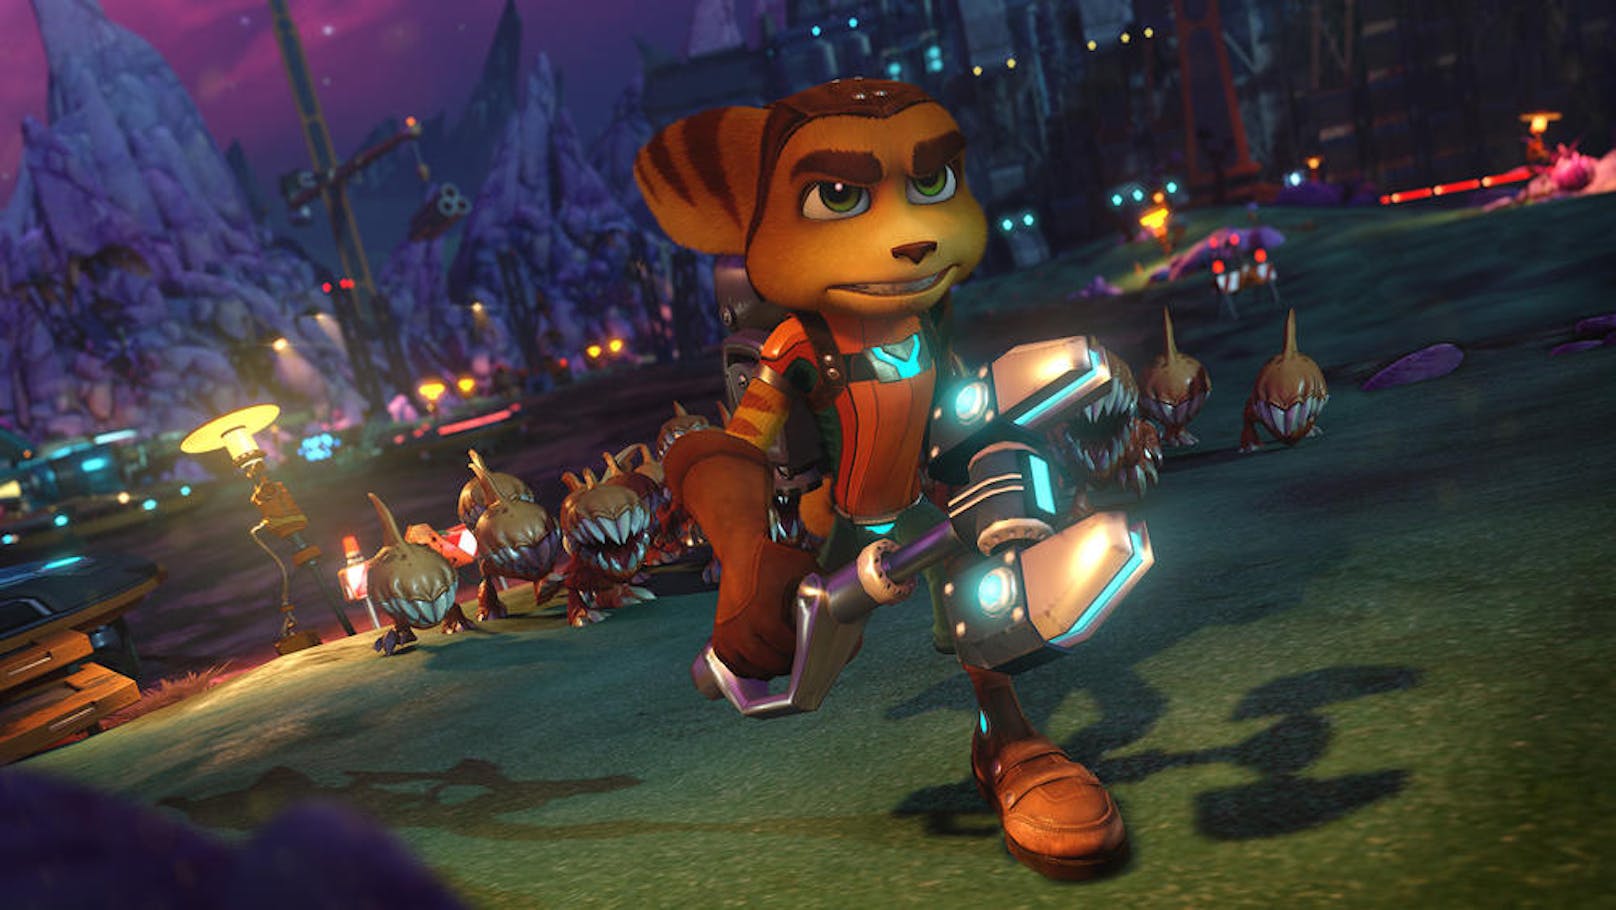  <a href="https://www.heute.at/digital/games/story/Ratchet---Clank-im-Test--Comeback-des-Chaos-Duos-19659923" target="_blank">Ratchet & Clank</a>